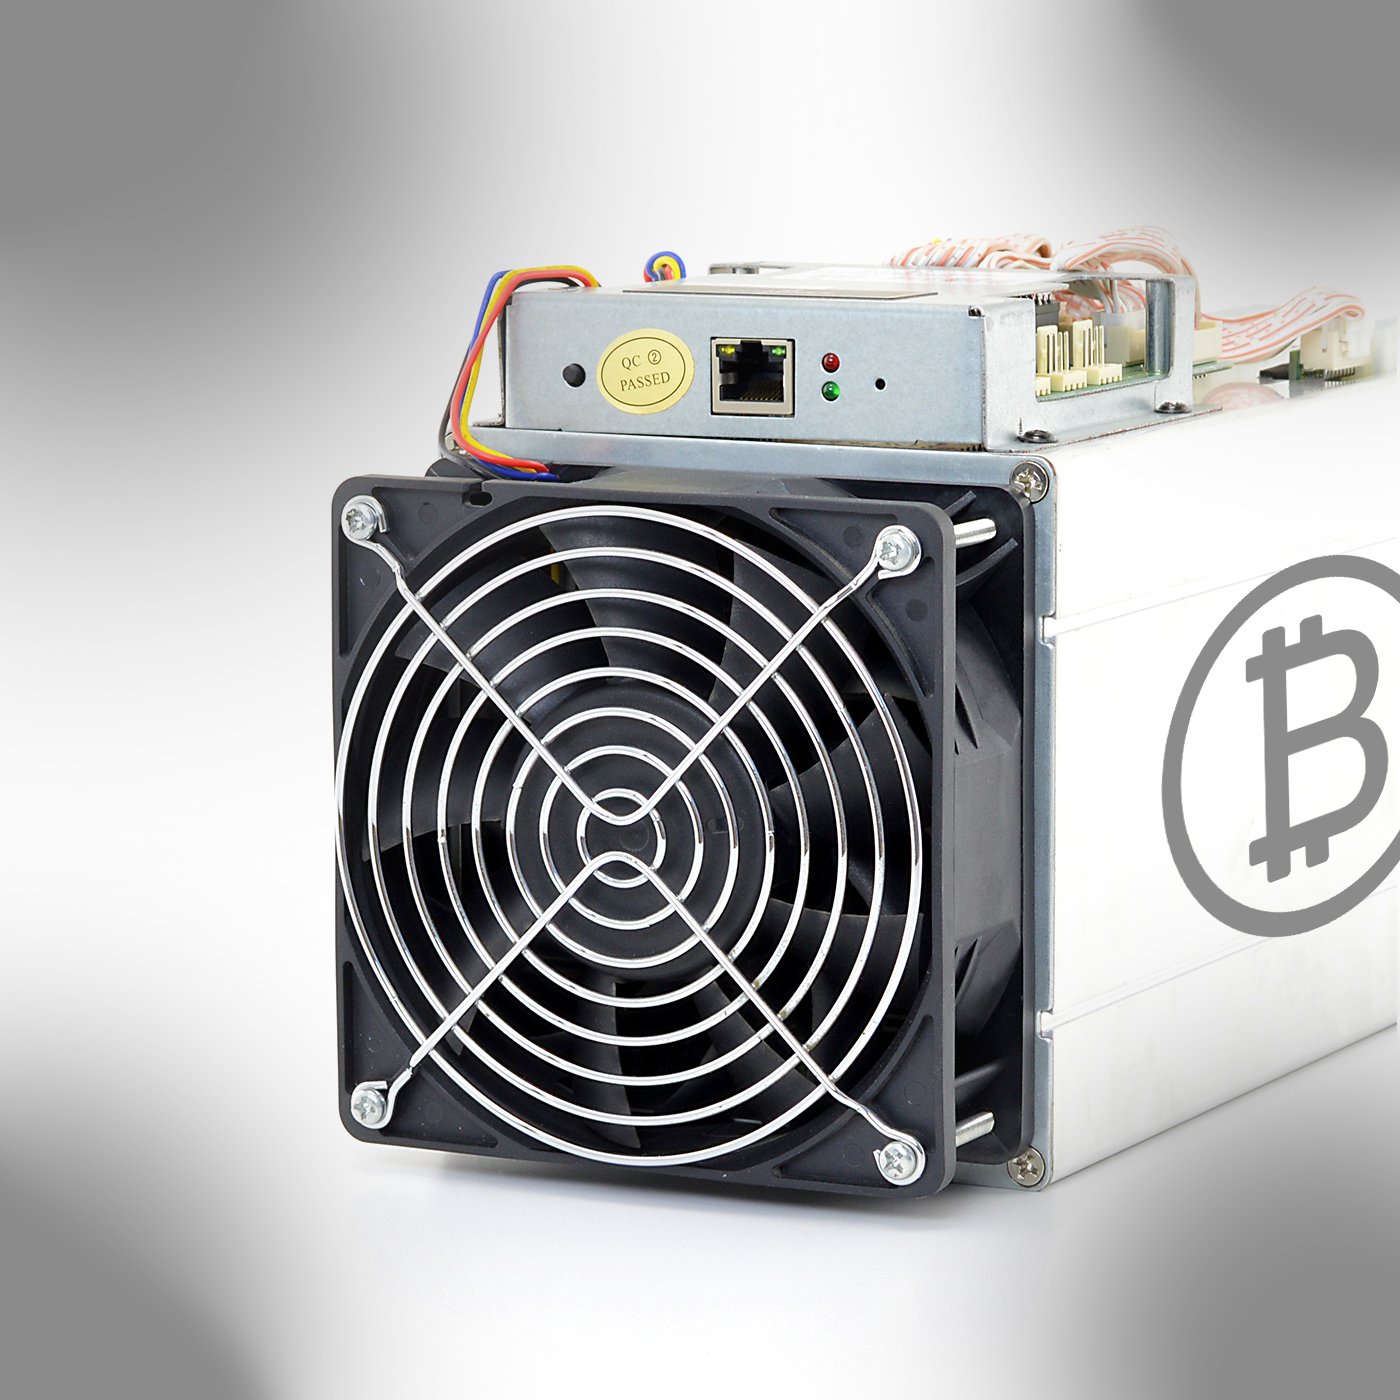 Plattsburgh Officials Want Bitcoin Miners to Vacate the Small Town